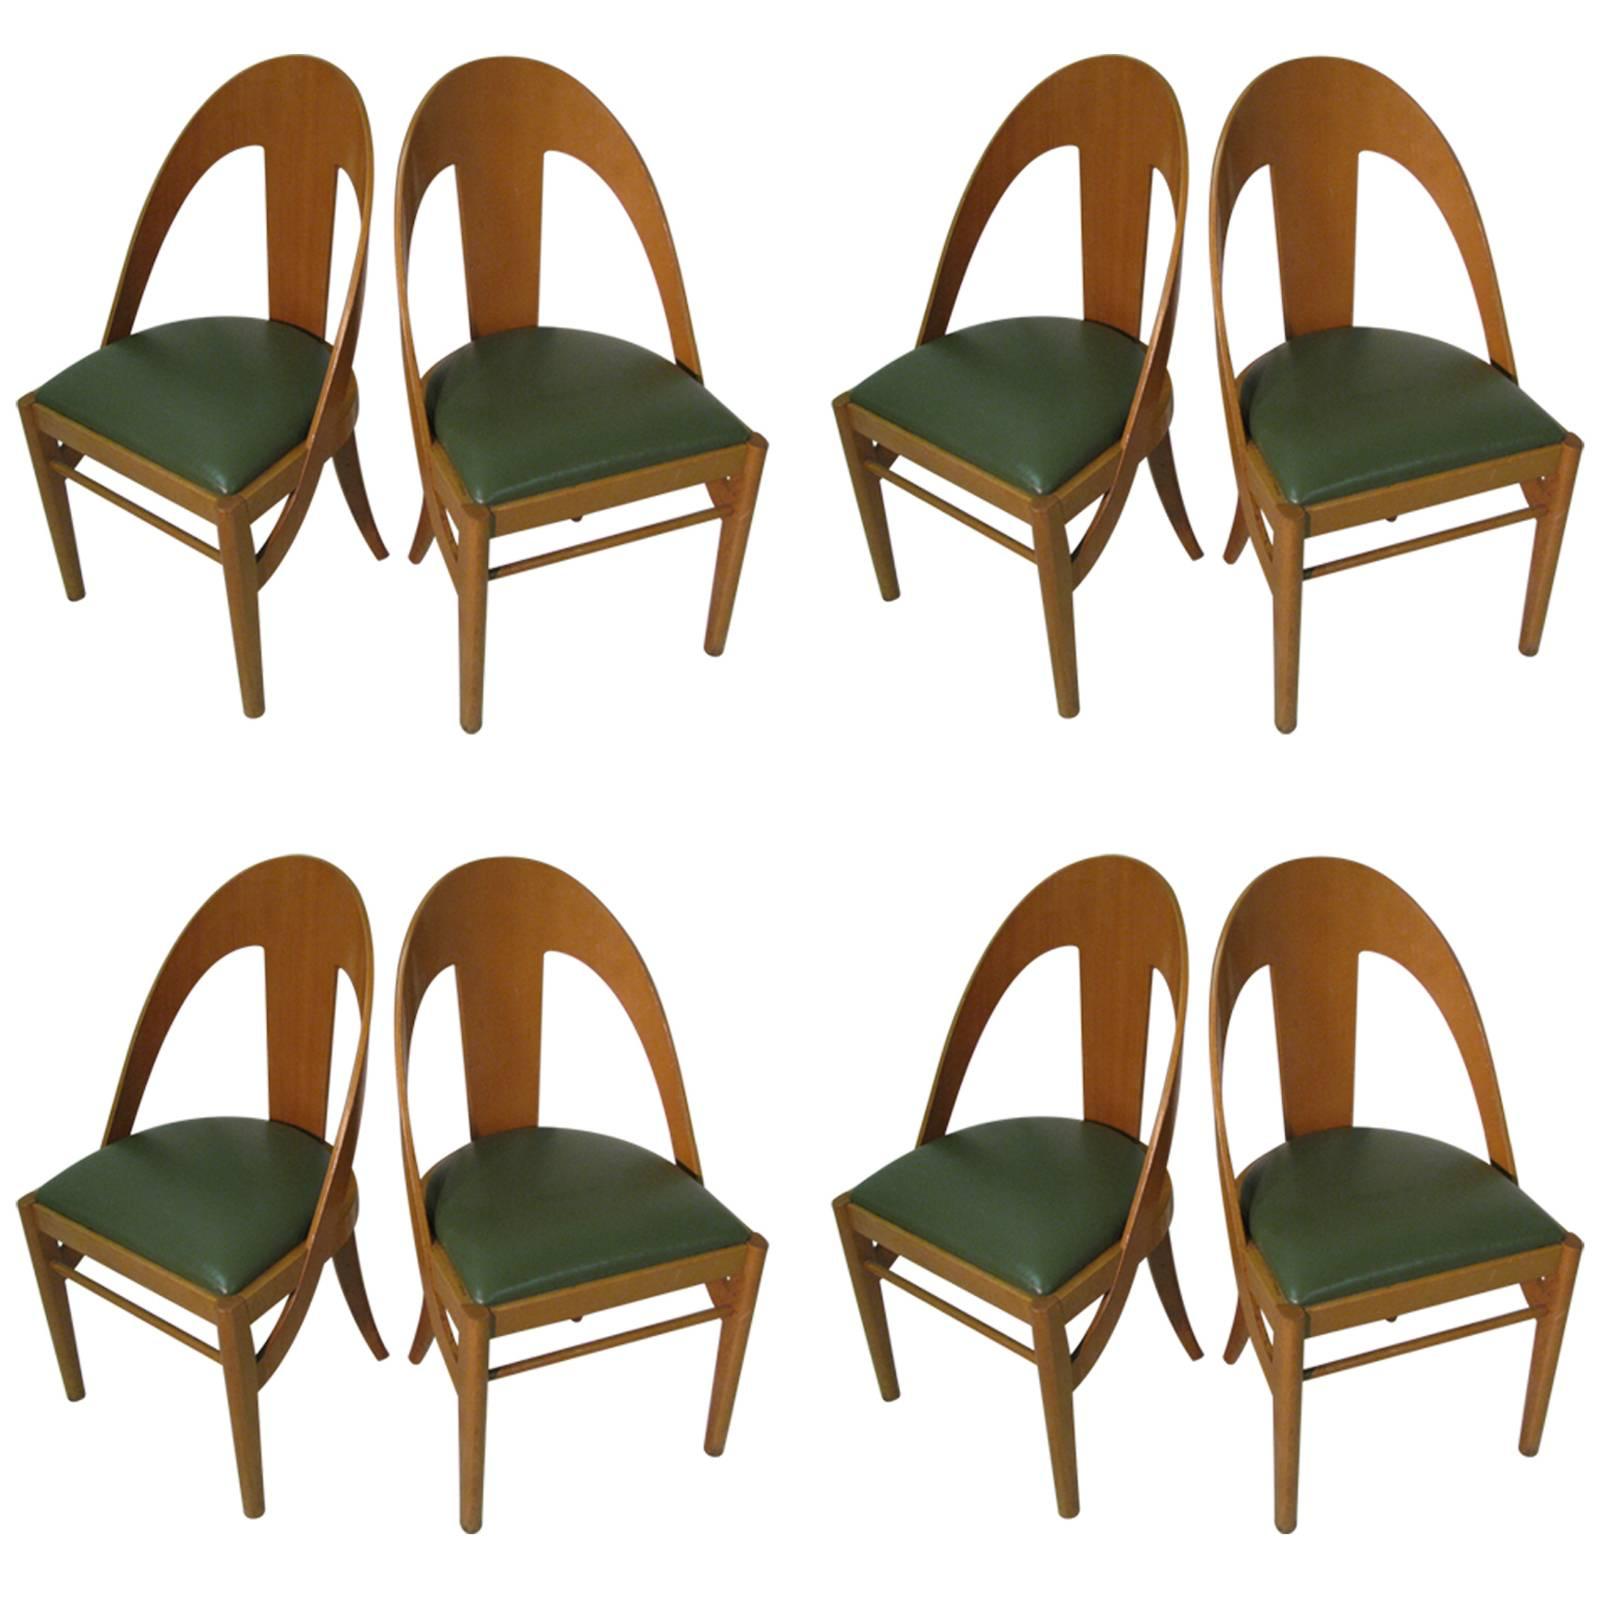  Mid-Century Modern Bent Maple Spoon Back Cafe Dining Chairs 3 Available